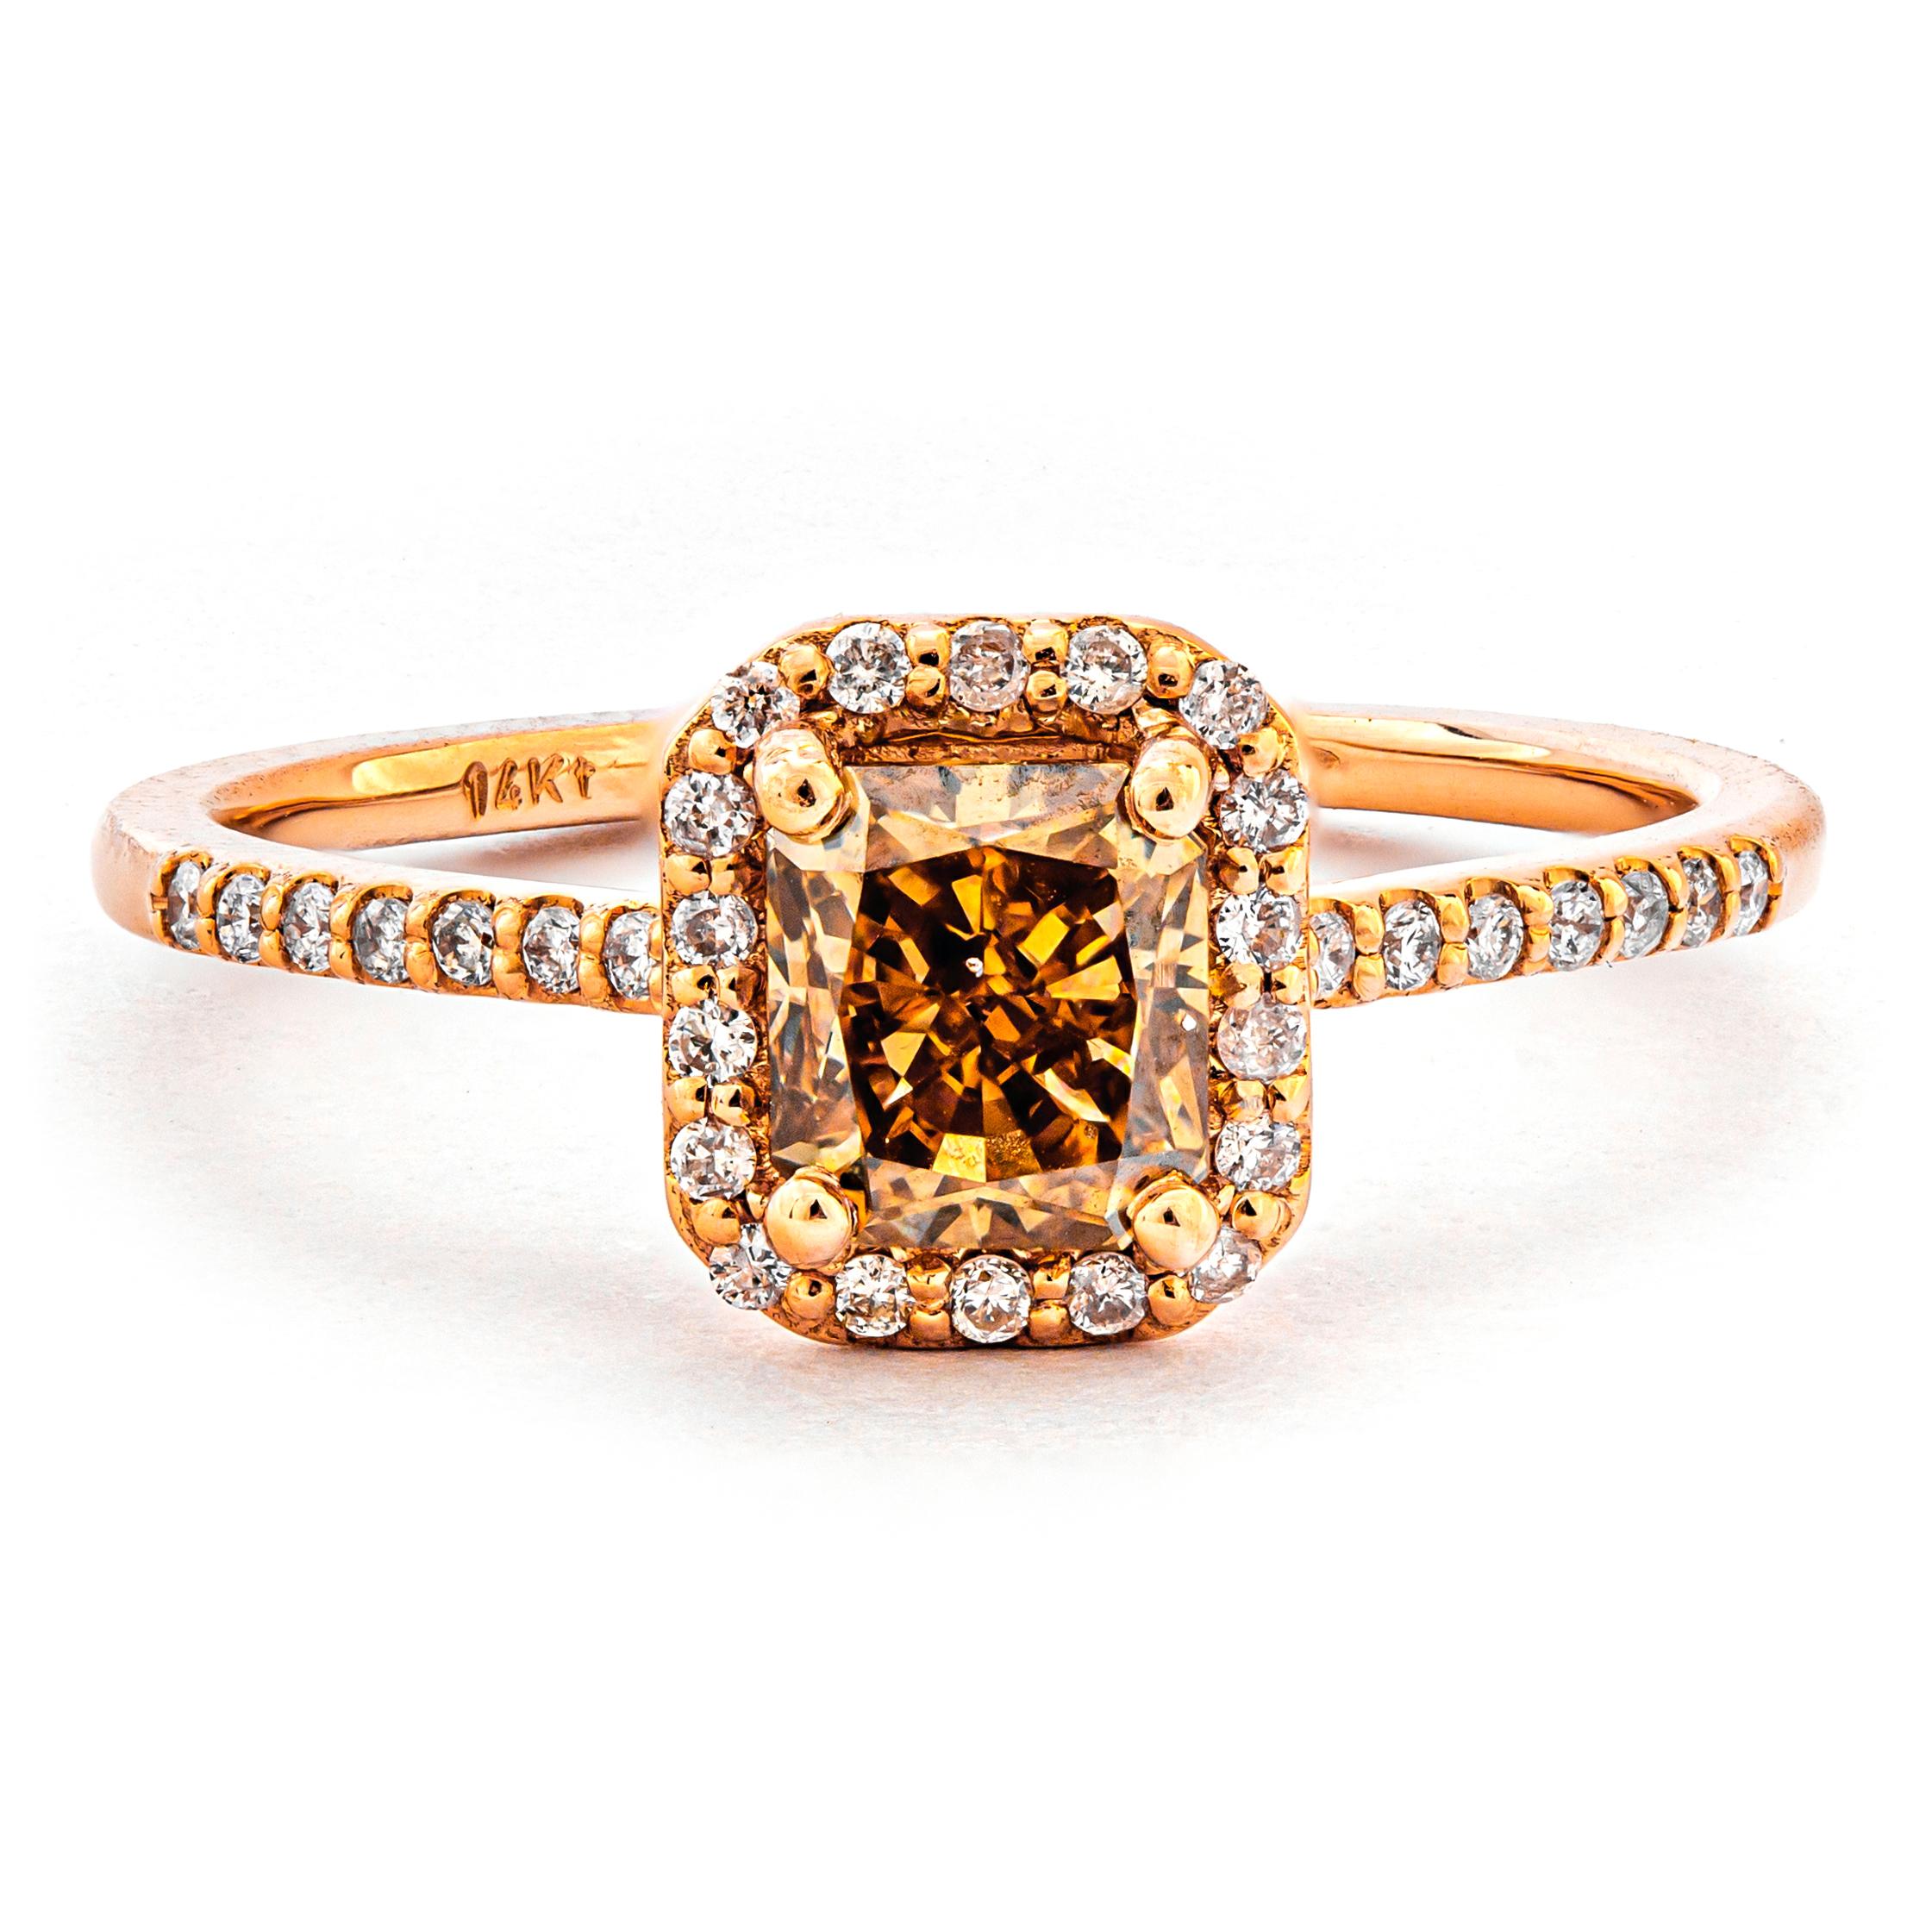 Radiant Cut 1.01 Ct VS2 Natural Fancy Intense Yellow Brown Diamond Ring, No Reserve Price